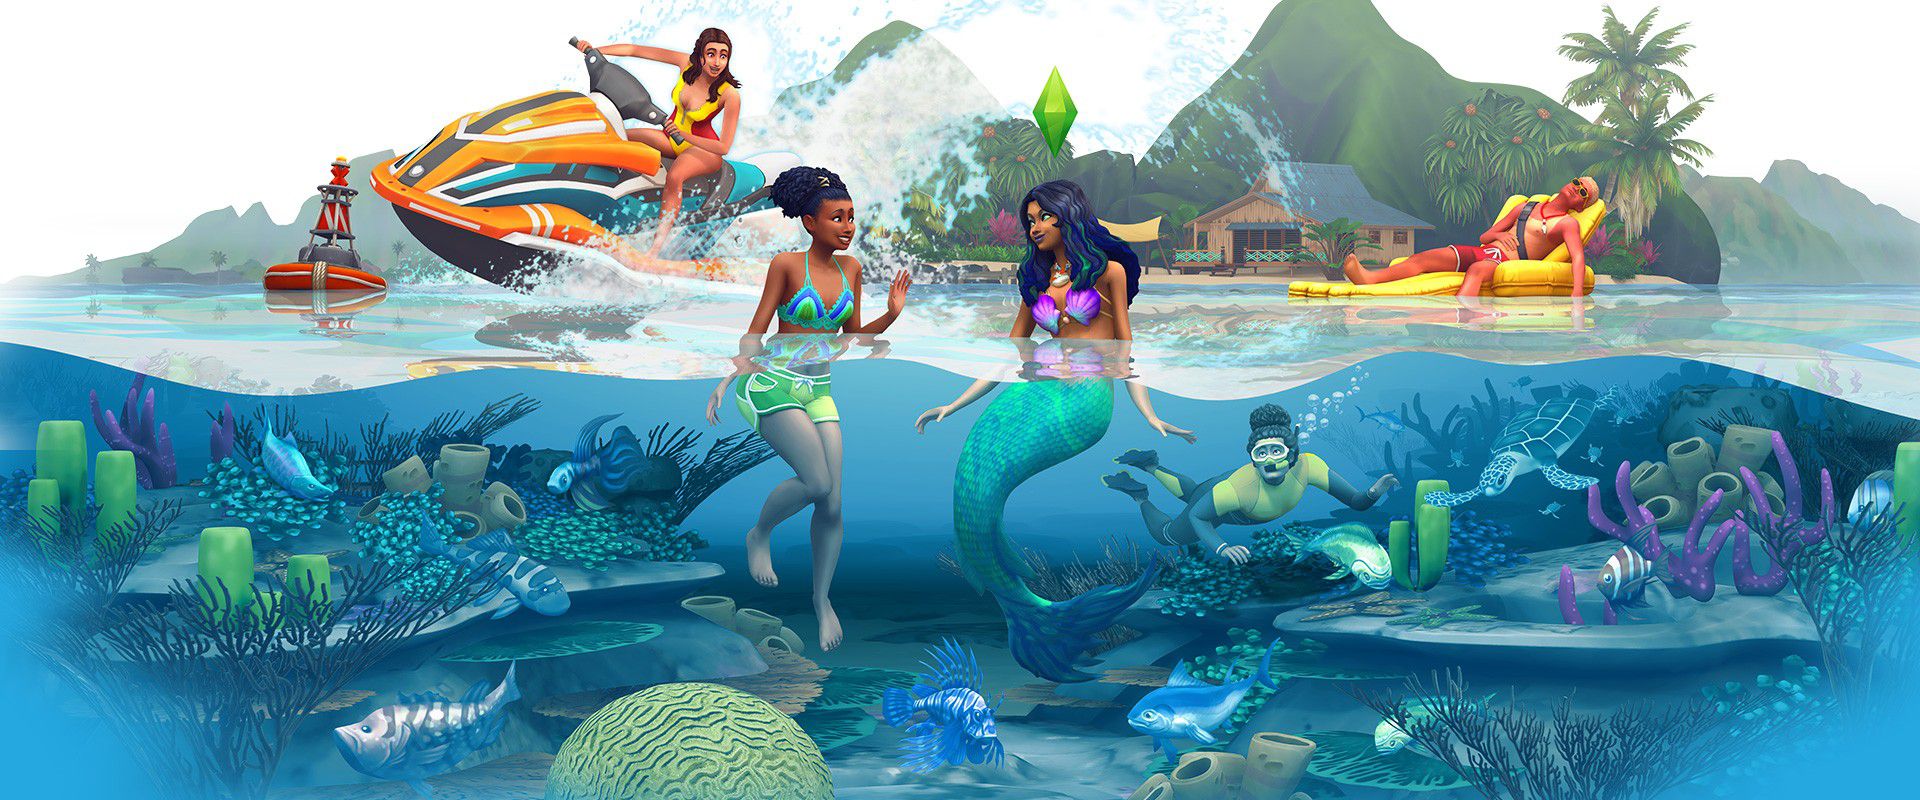 download sims 4 all expansion packs free no survey